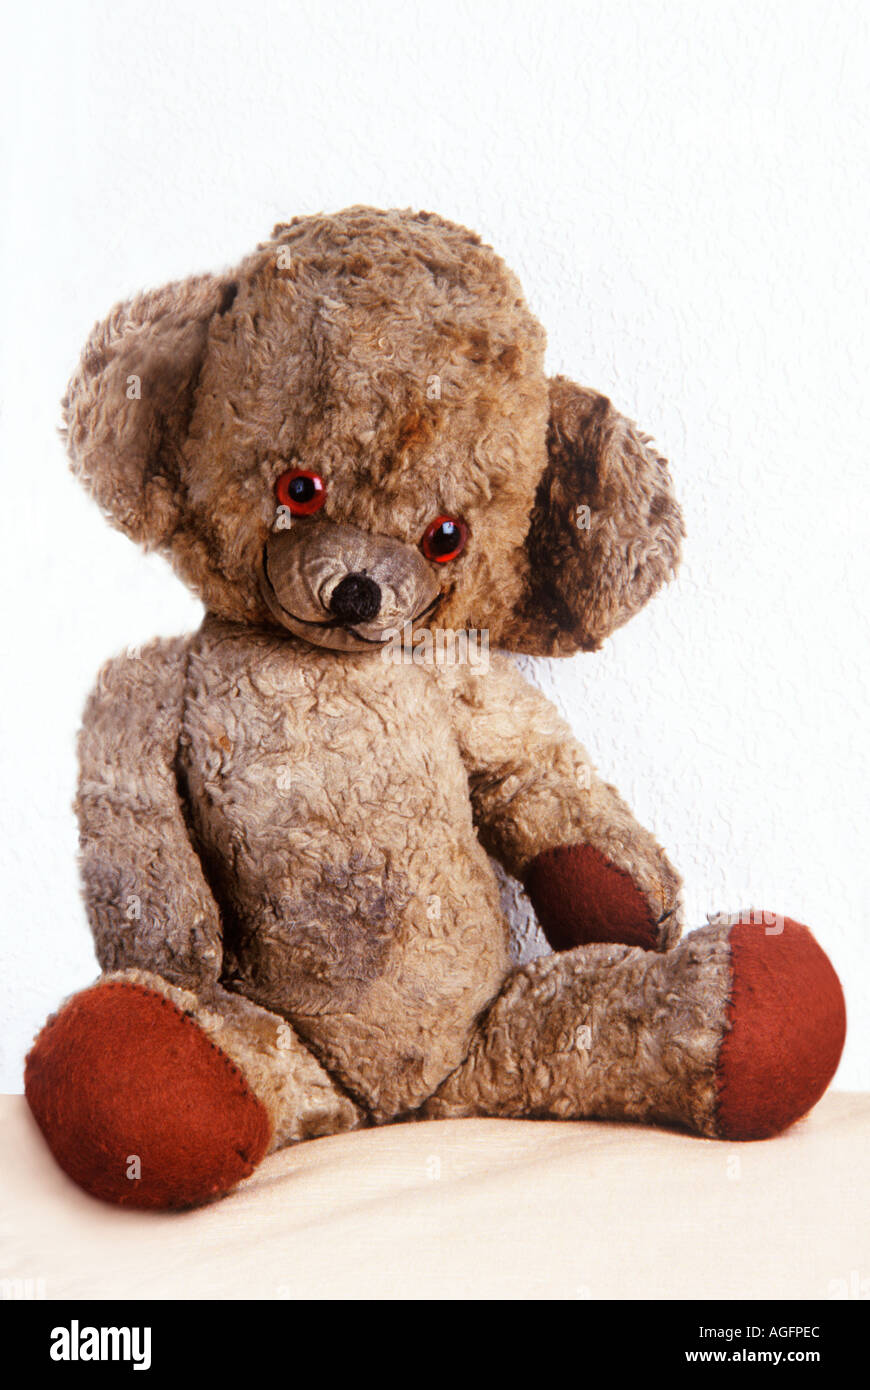 Well loved scruffy old teddy bear seated Stock Photo